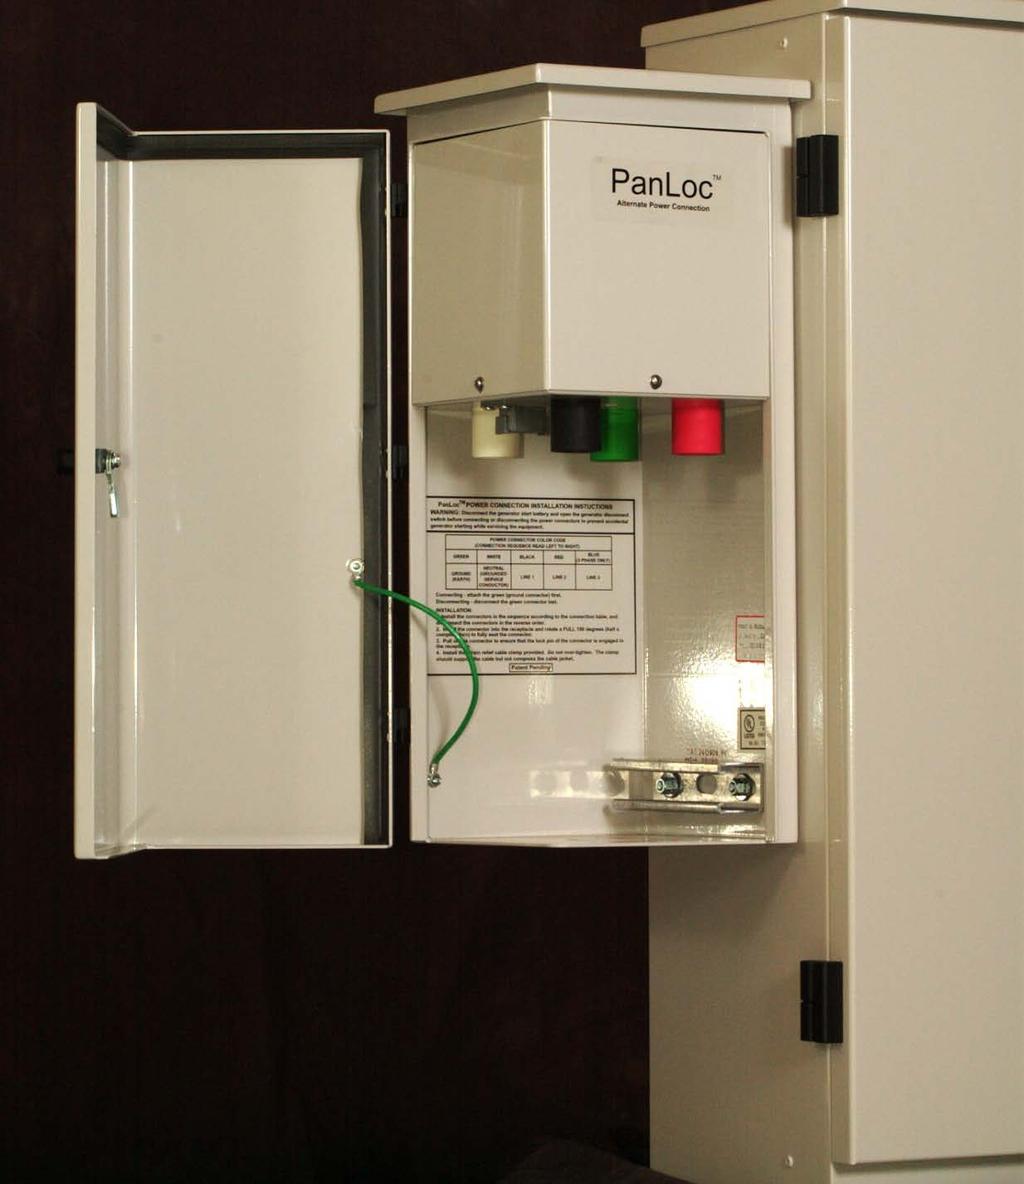 PanLoc alternate power connection PanLoc was developed to eliminate compatibility issues between alternate Power Source and Load Distribution.